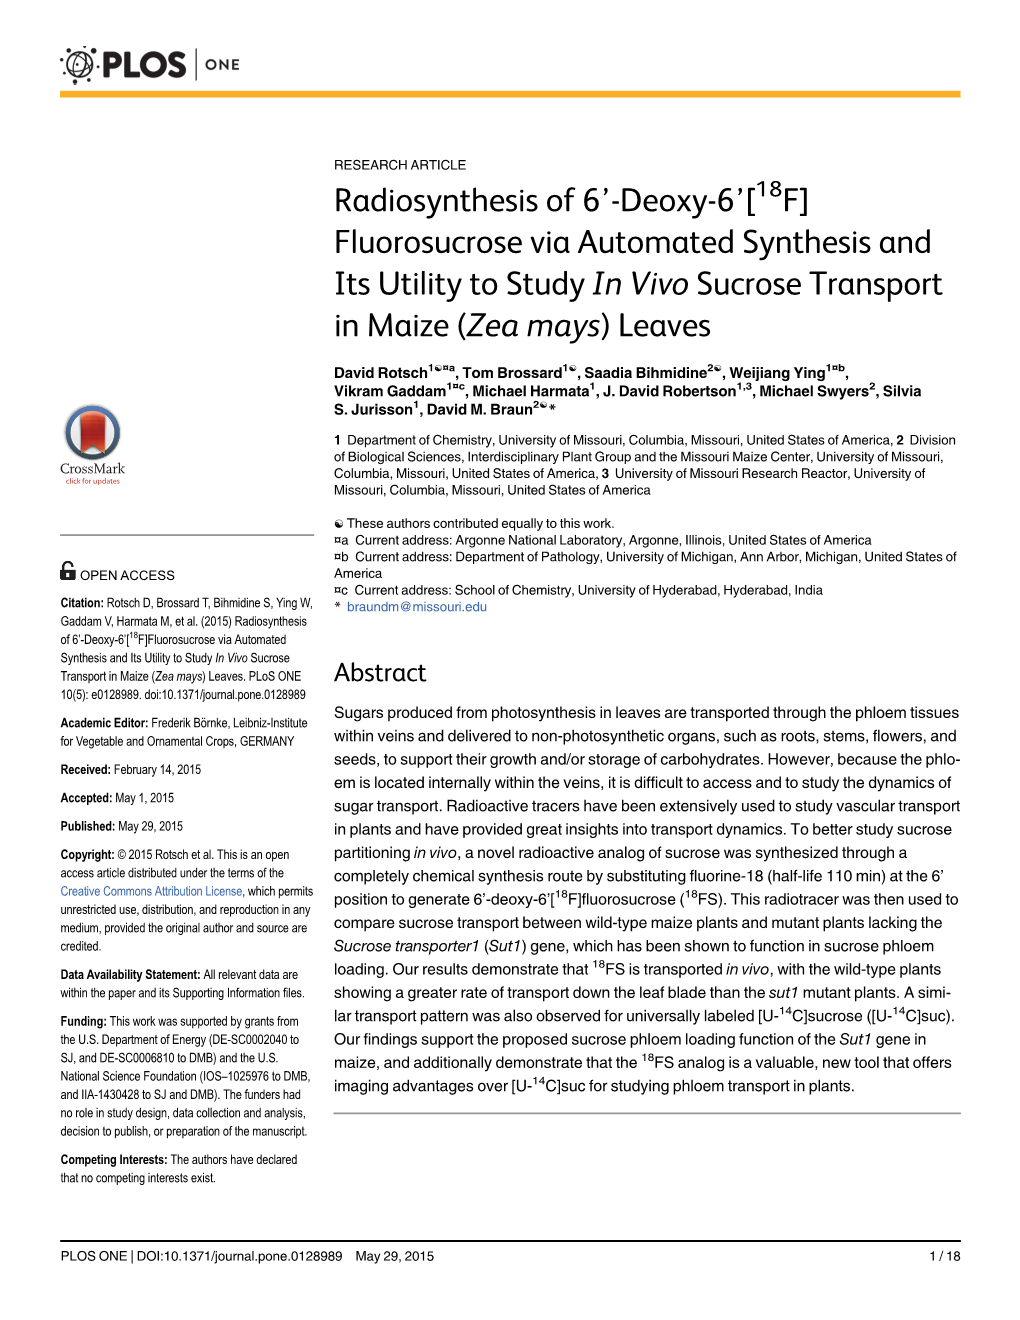 Radiosynthesis of 6'-Deoxy-6'[18F]Fluorosucrose Via Automated Synthesis and Its Utility to Study in Vivo Sucrose Transport I